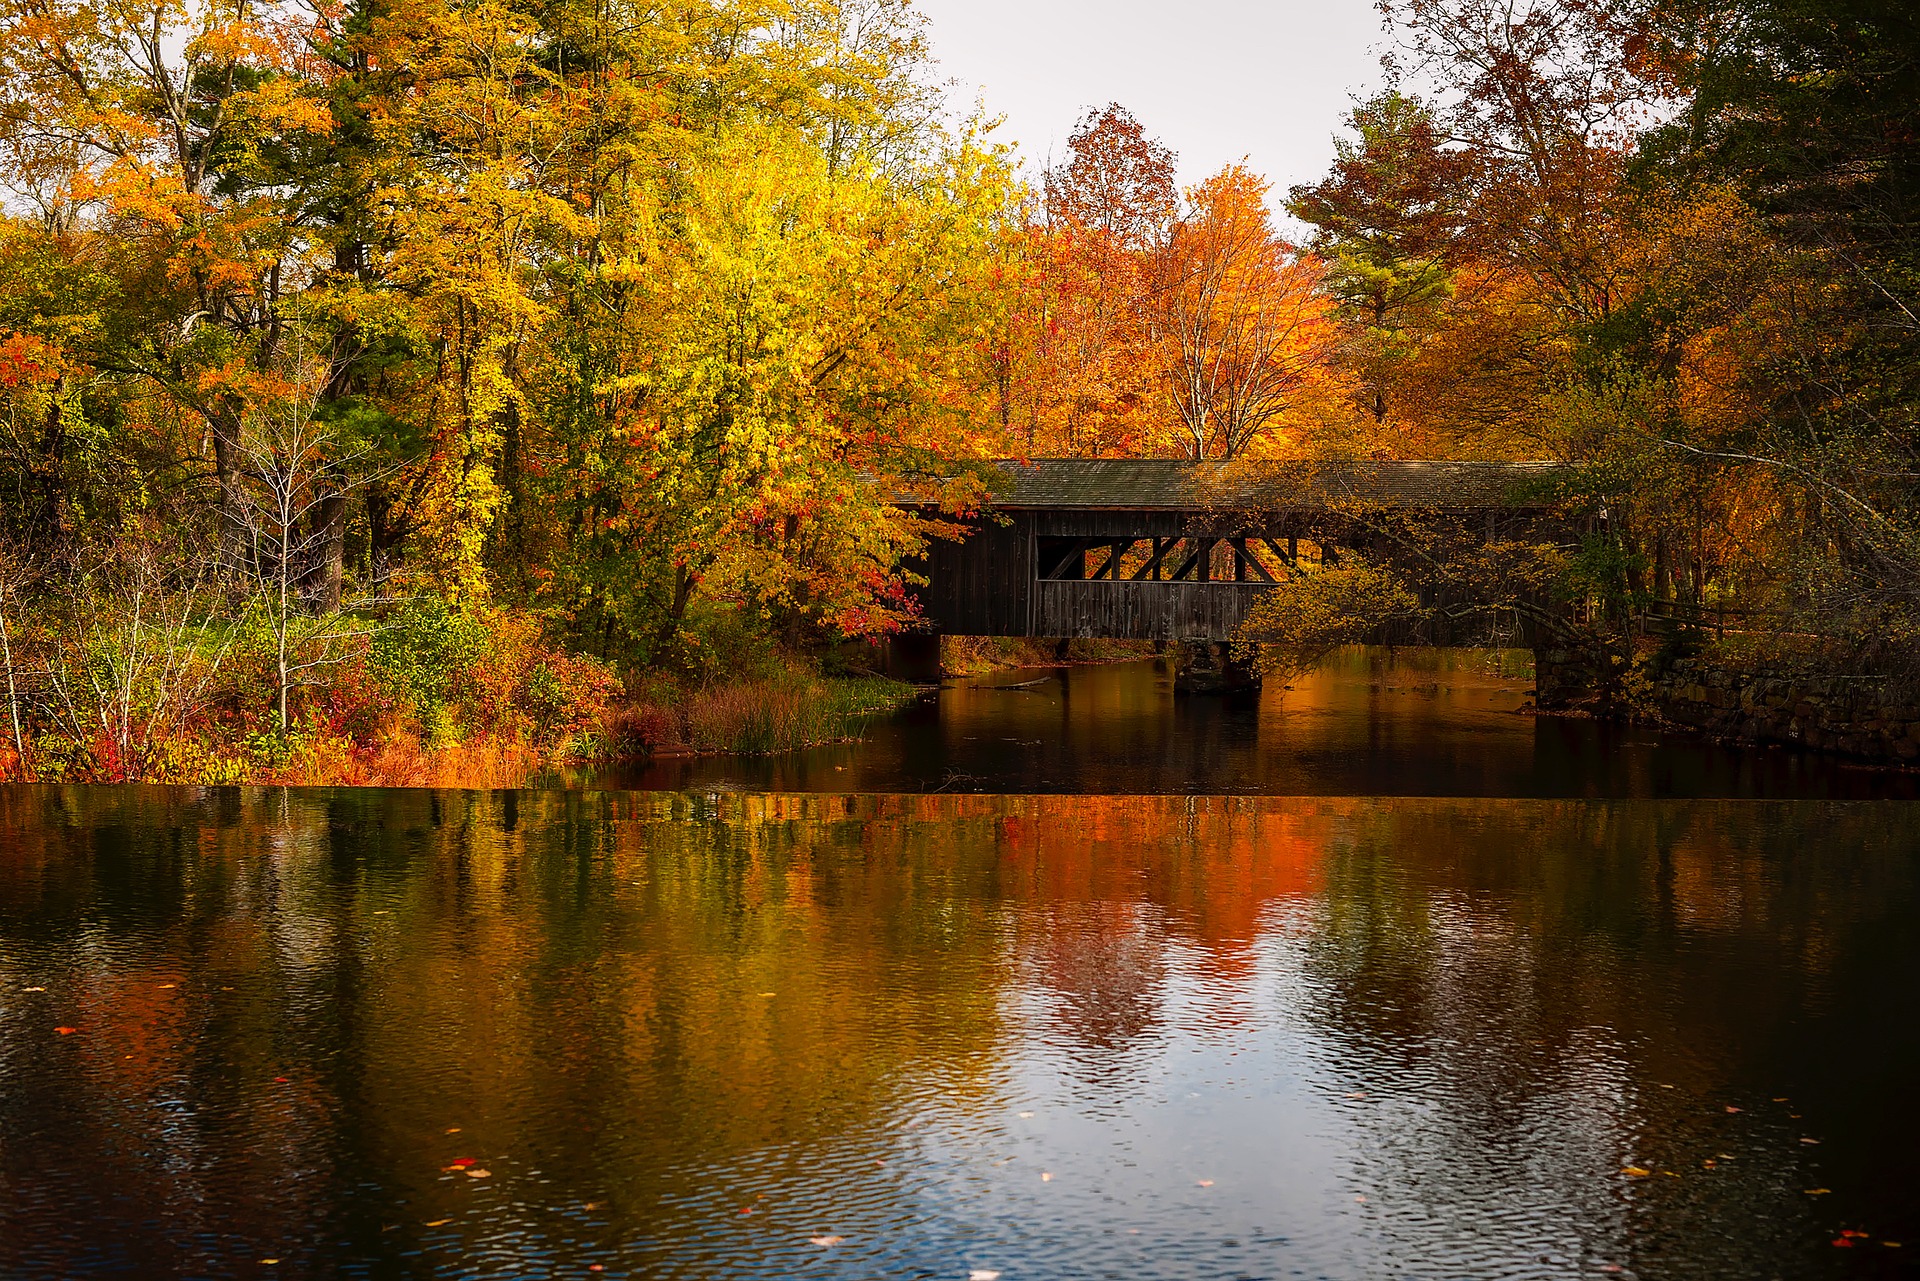 Stay in peace: Covered bridge in fall.